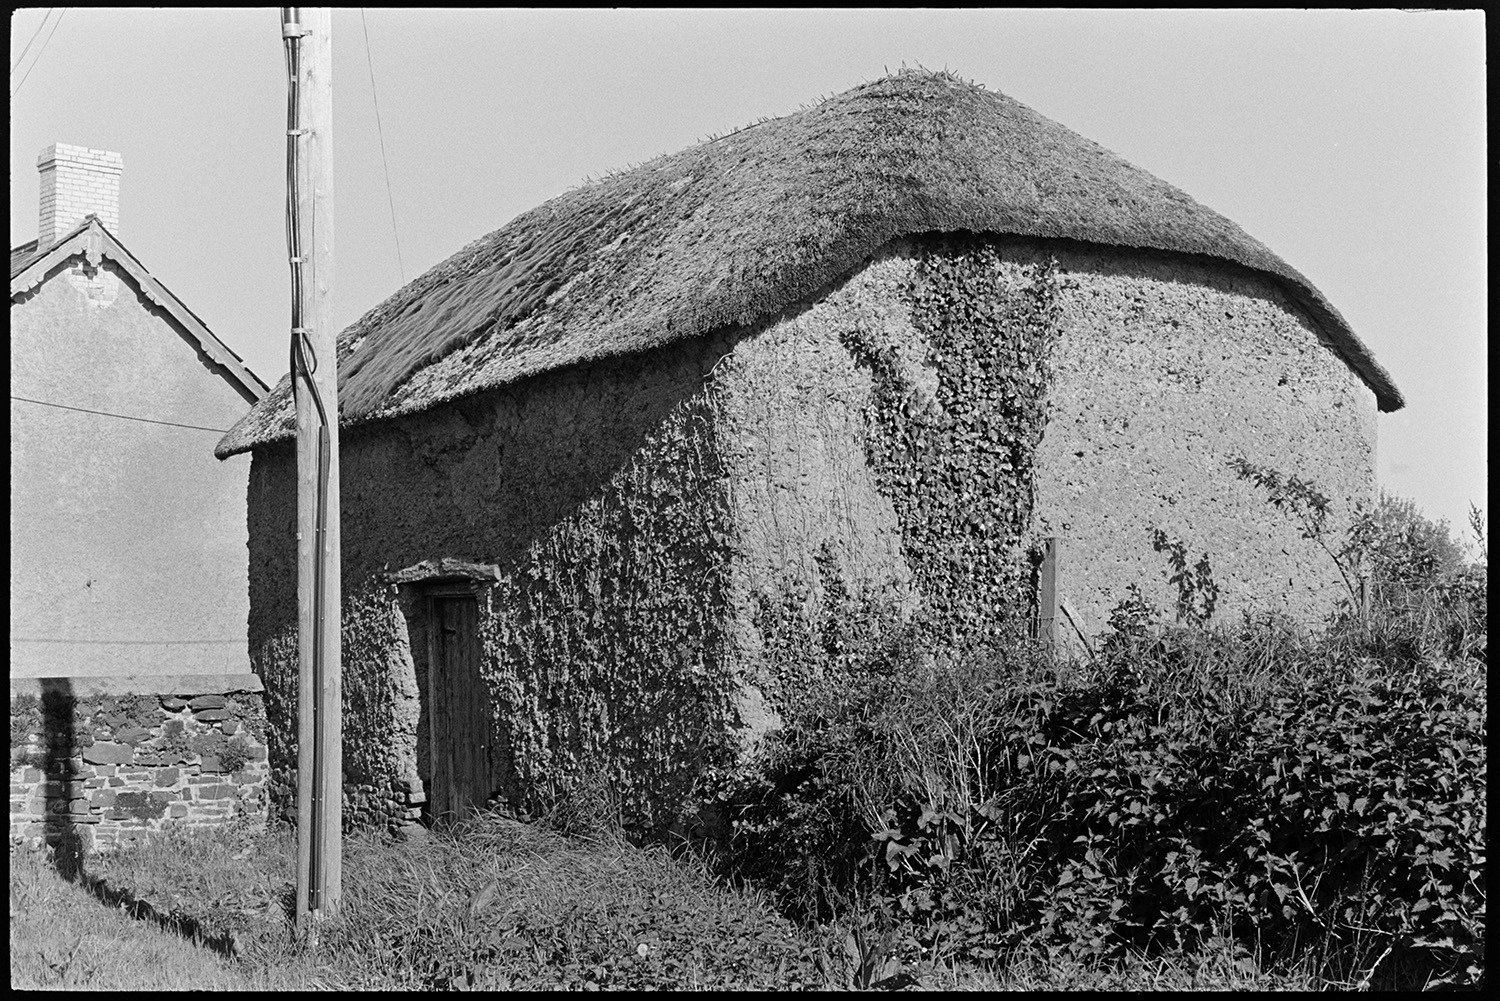 Cob and thatch barn before it was renovated and converted to stables. 
[An overgrown cob and thatch barn at Riddlecombe. It was later converted to stables.]